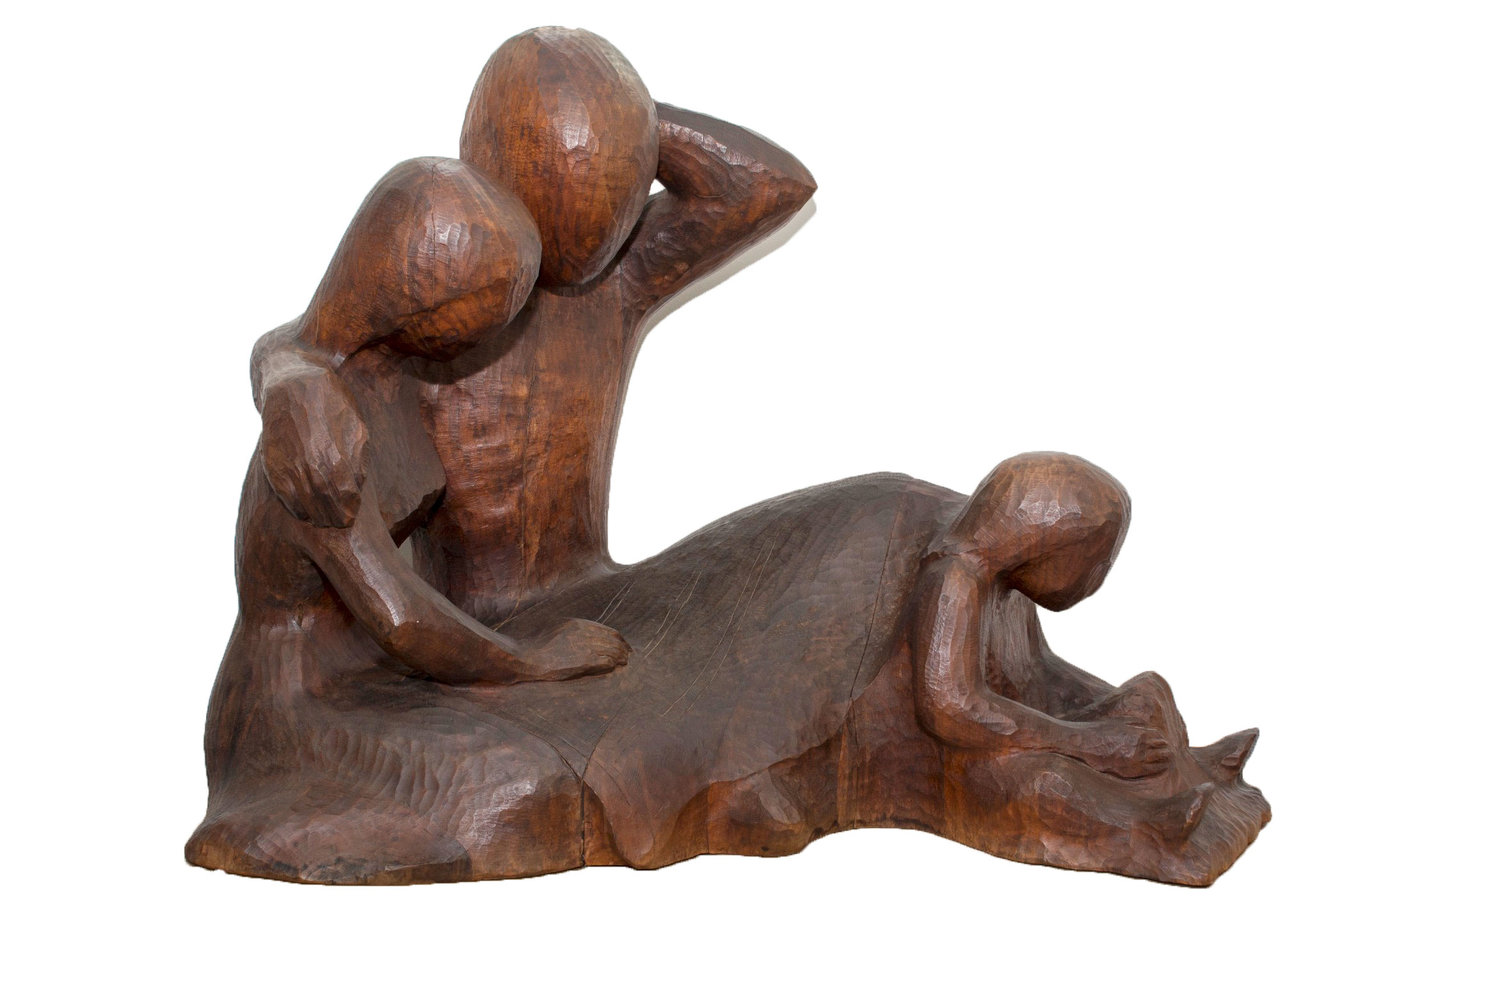 Emil Milan’ family sculpture commissioned by the College of Health and Human Development (1970) still on display in Henderson Hall.